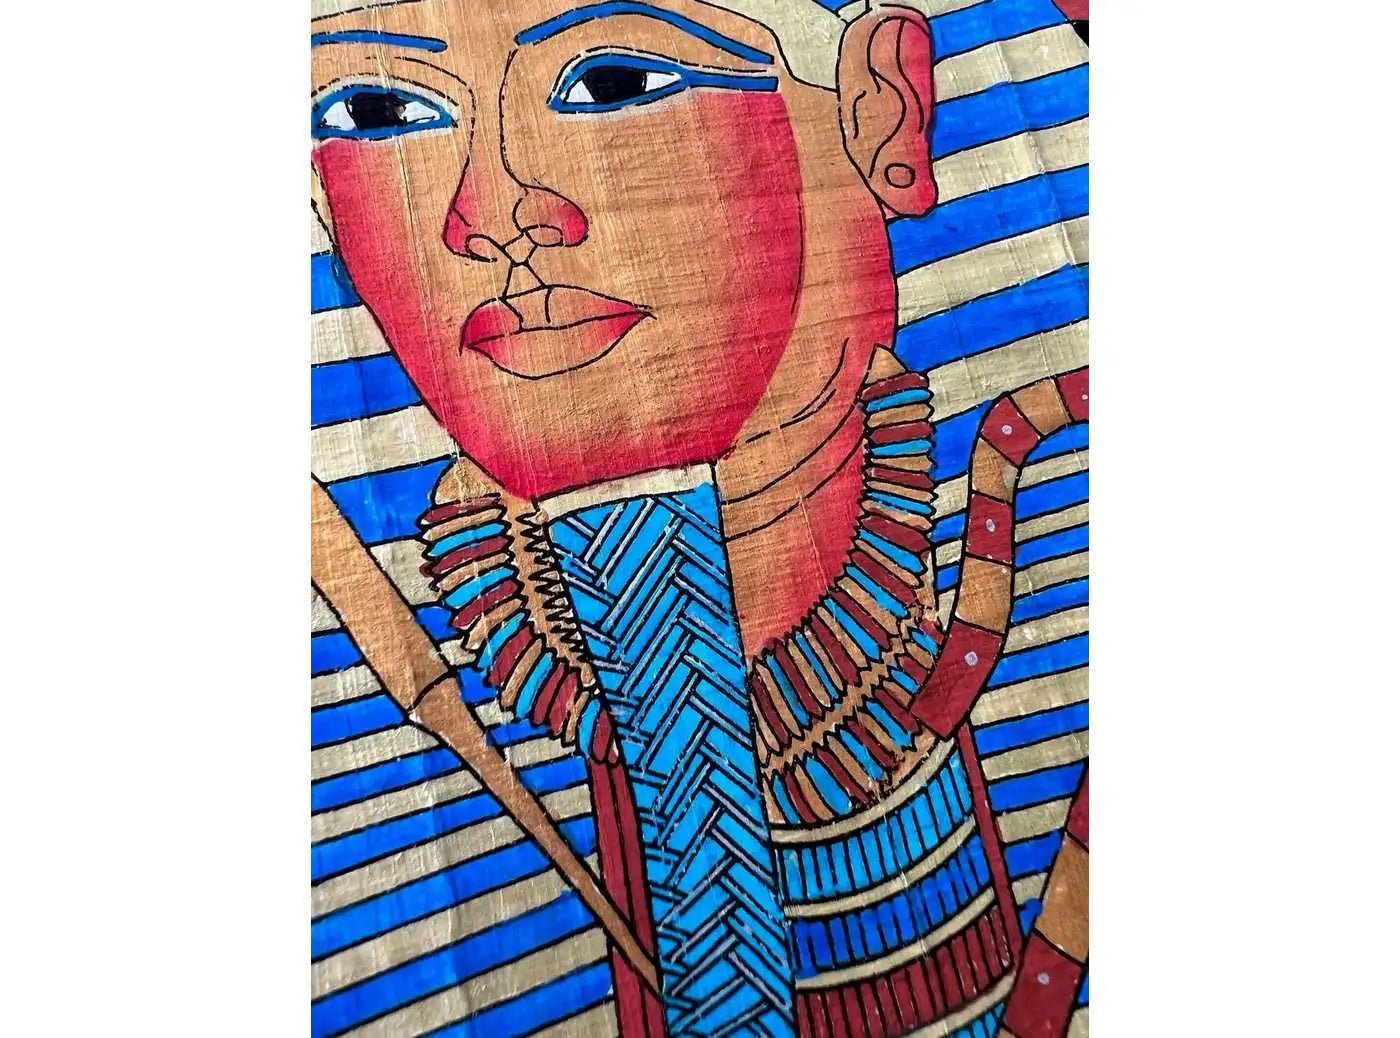 King Tut Tutankhamun - Hand painted In Egypt With Authentic Papyrus Leaves - Egypt Decor